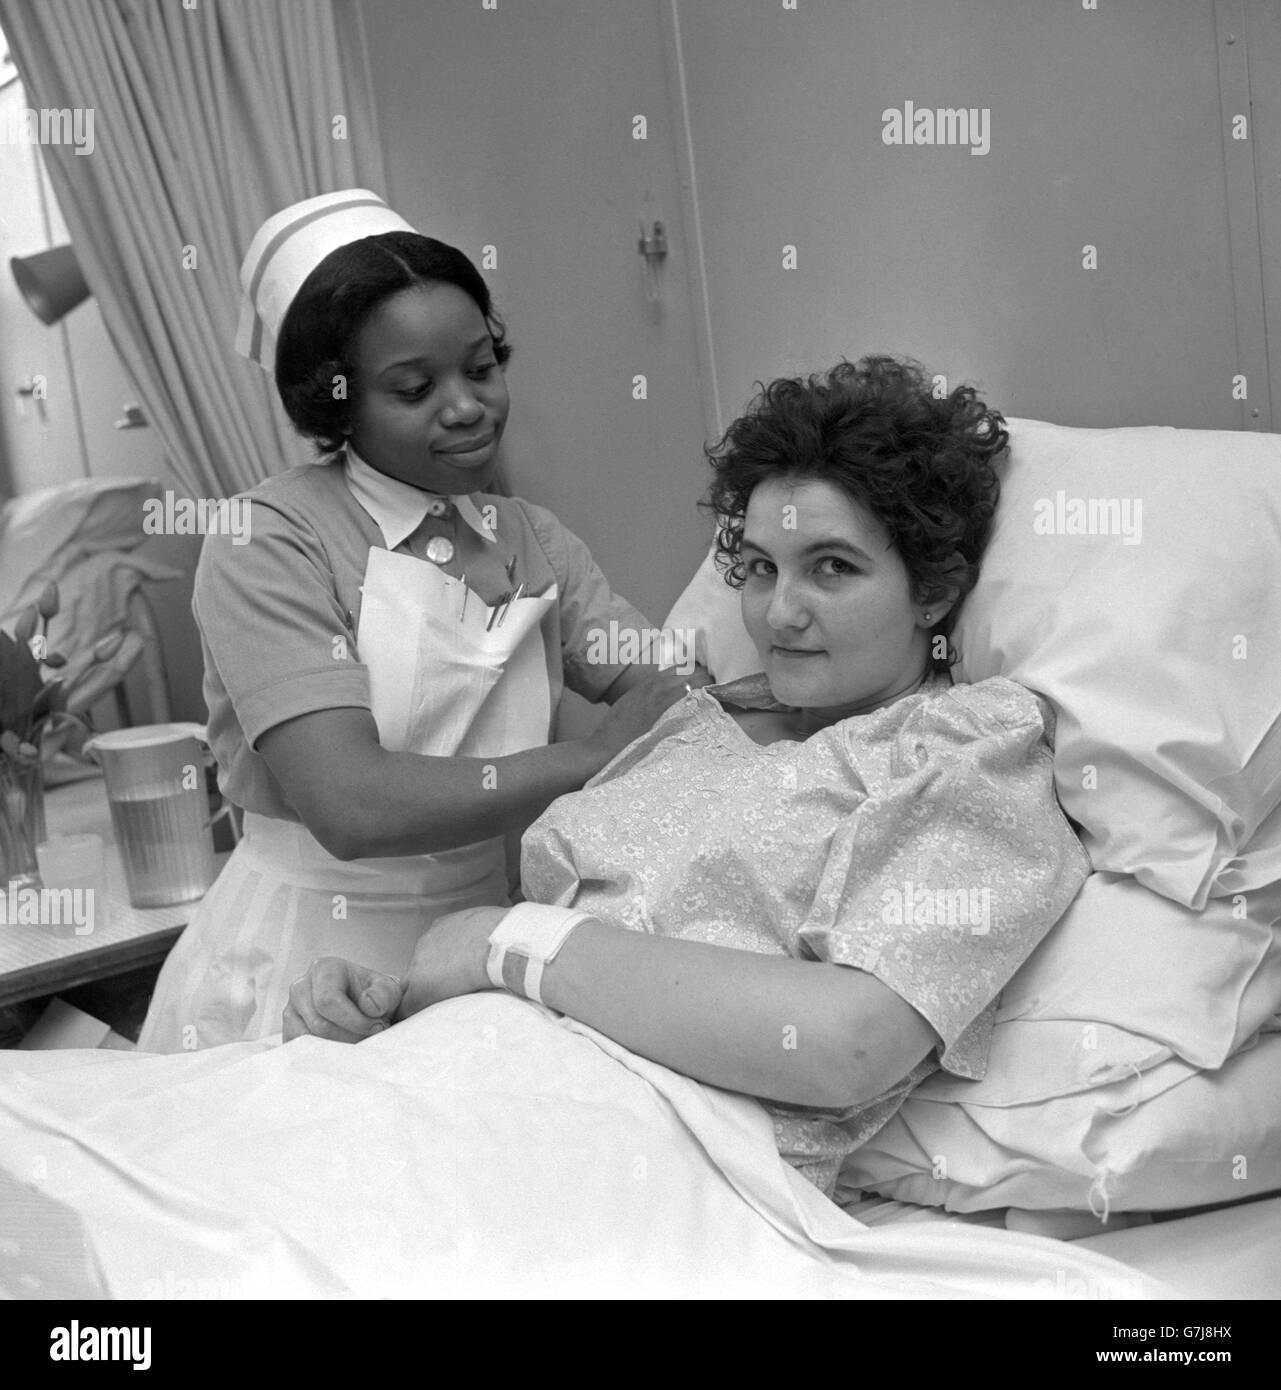 Marion King, 20, of Highbury, North London, a survivor of the Moorgate tube train disaster, in The London Hospital, Whitechapel. Marion, who has leg and rib injuries, was in the first carriage of the train. Stock Photo